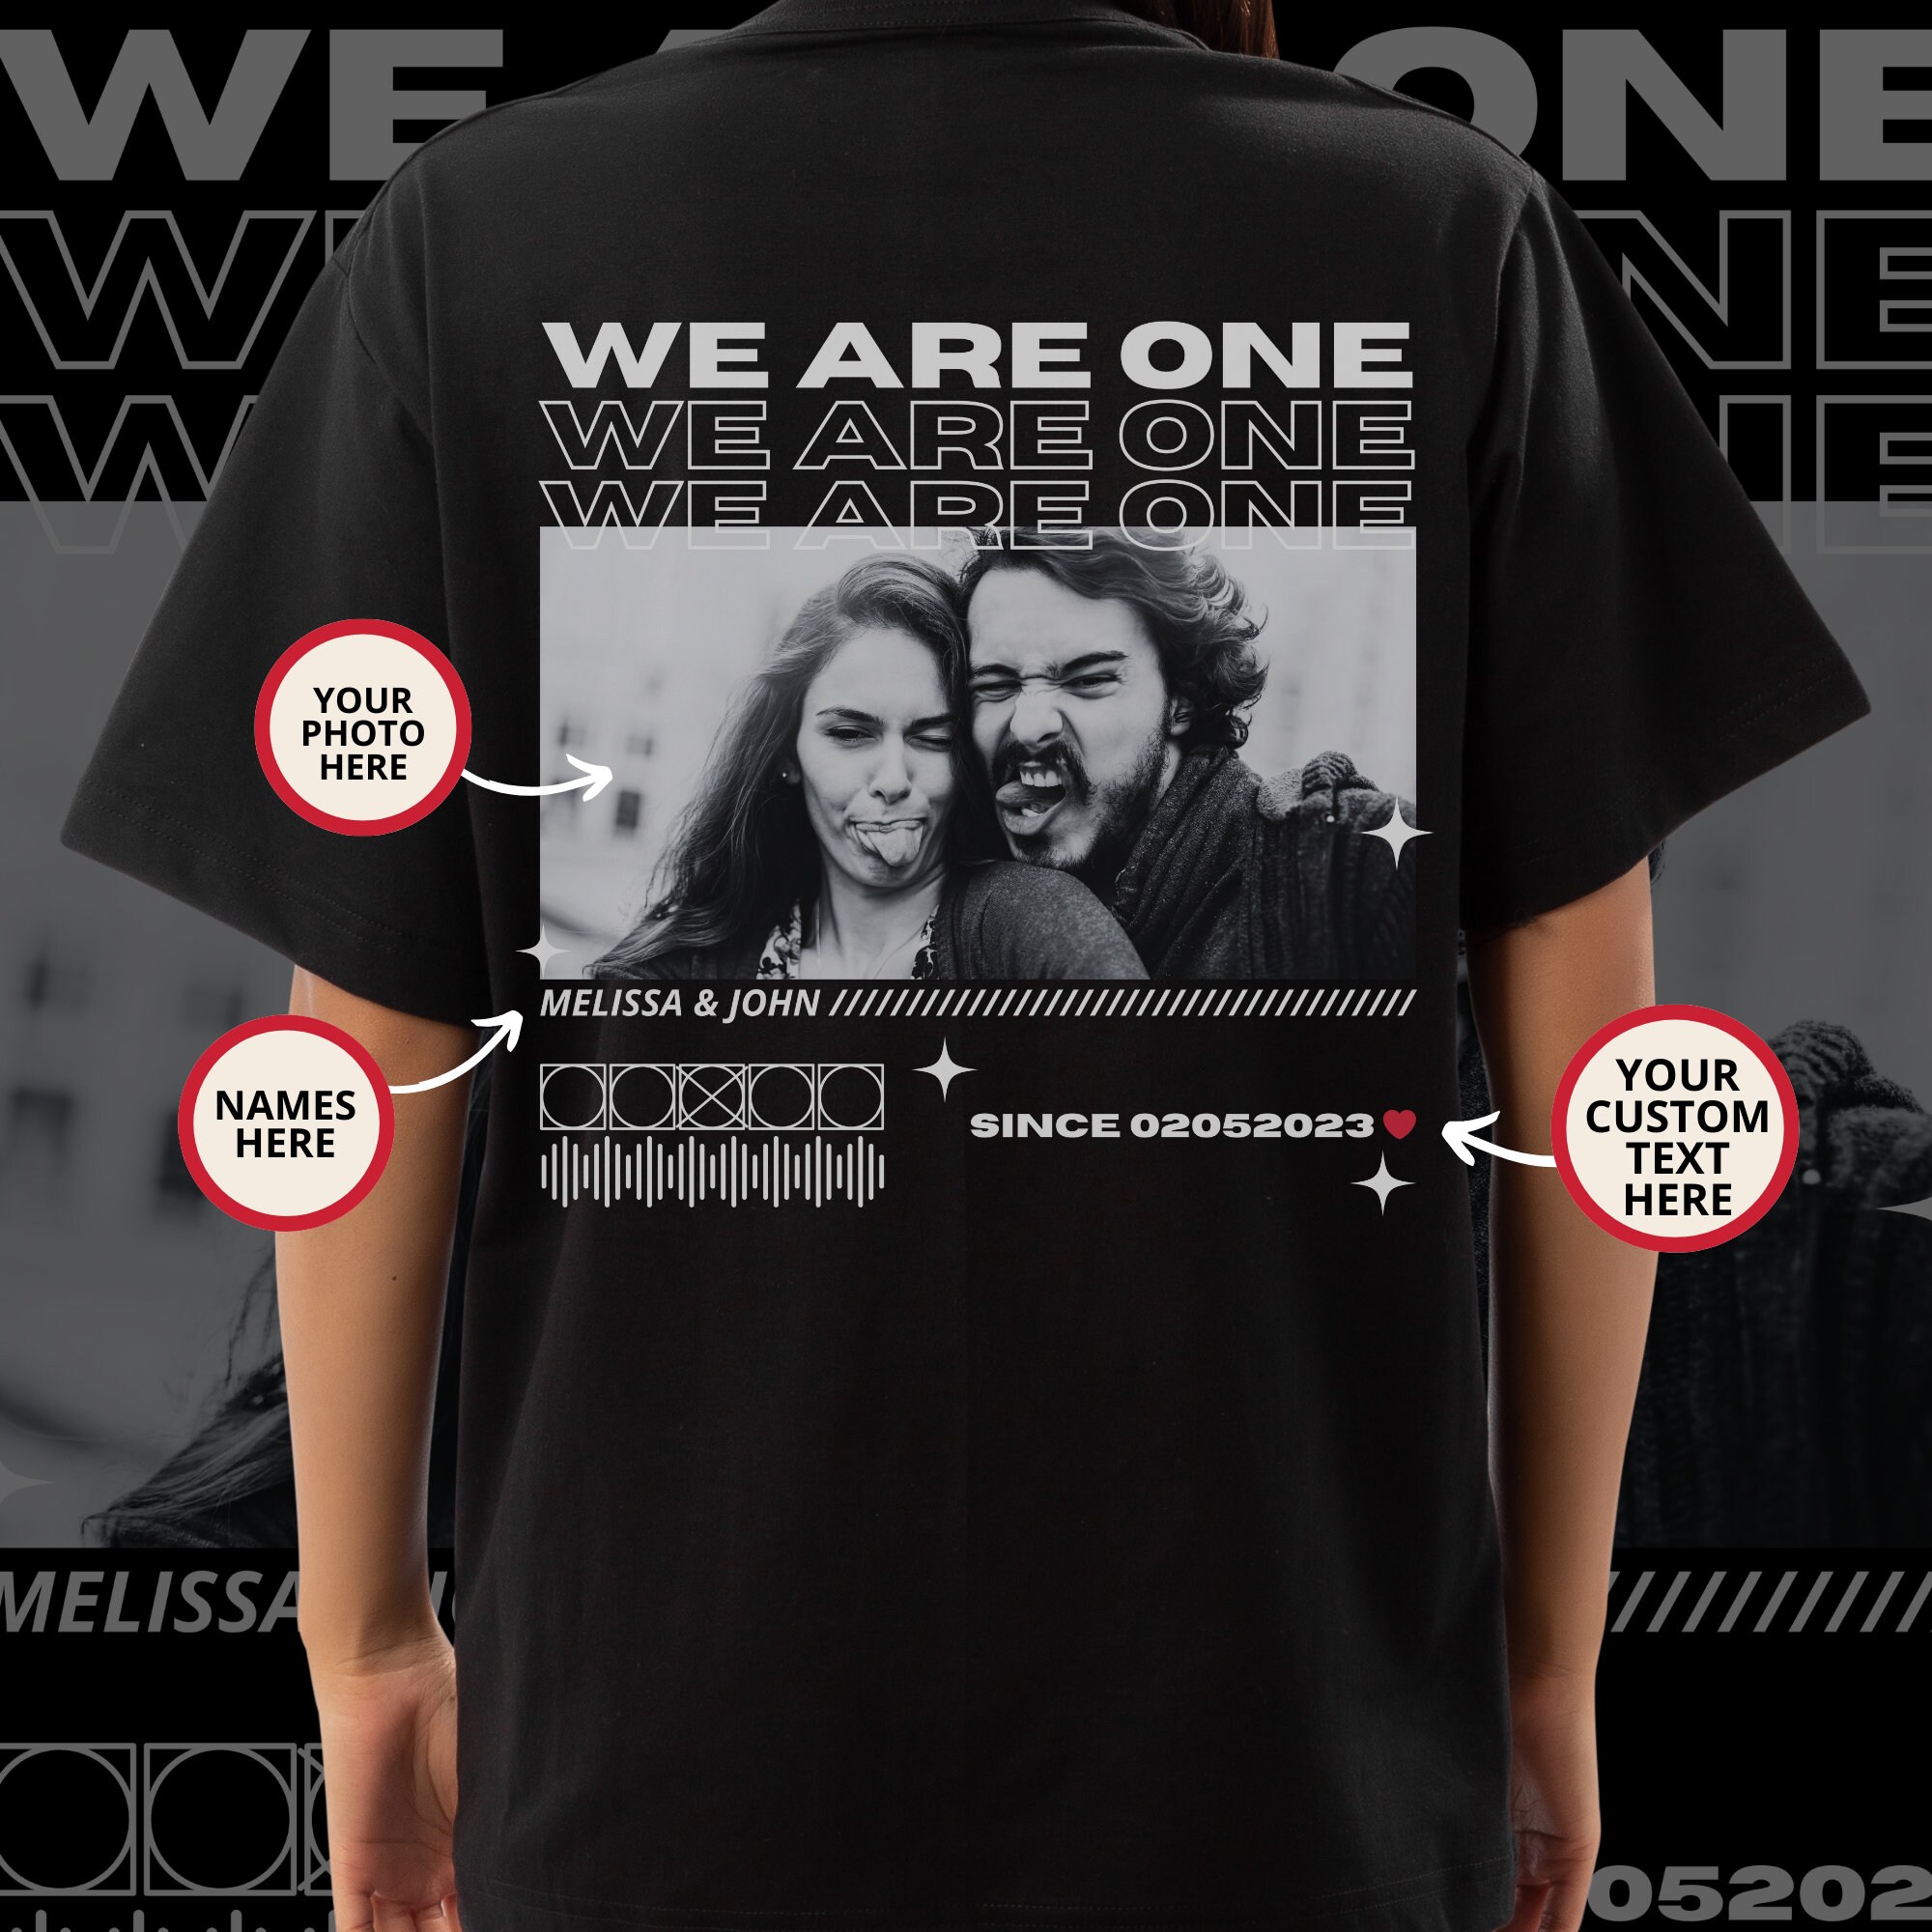 We Are One Shirt, Only You Shirt, Custom Photo Shirt